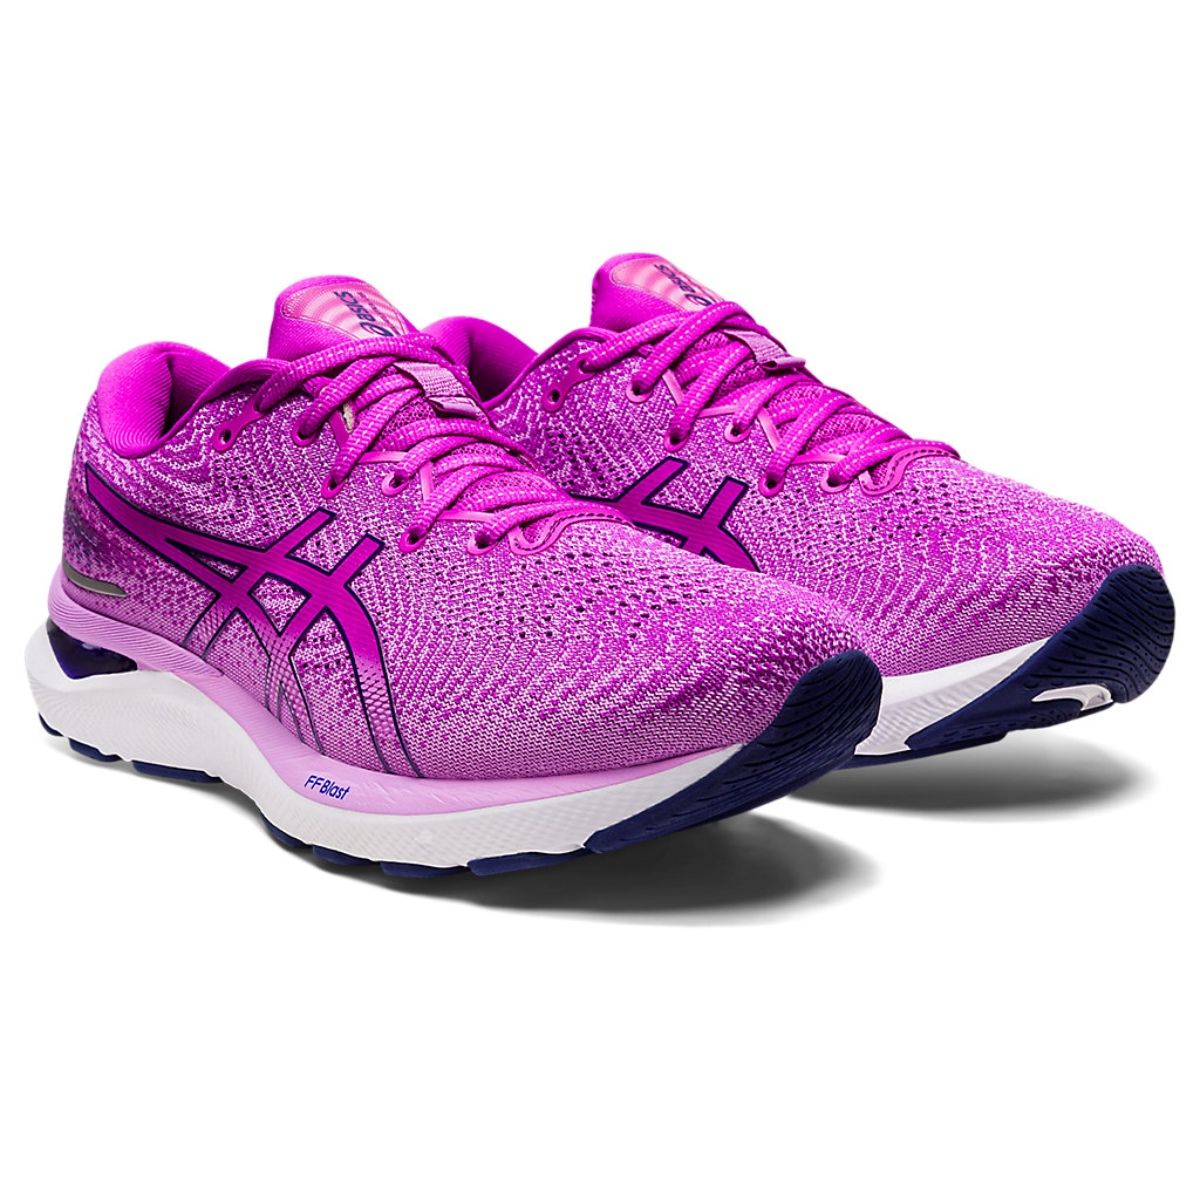 Asics Gelcumulus 24 Purple Womens Running Shoes: Buy Asics Gelcumulus 24  Purple Womens Running Shoes Online at Best Price in India | Nykaa